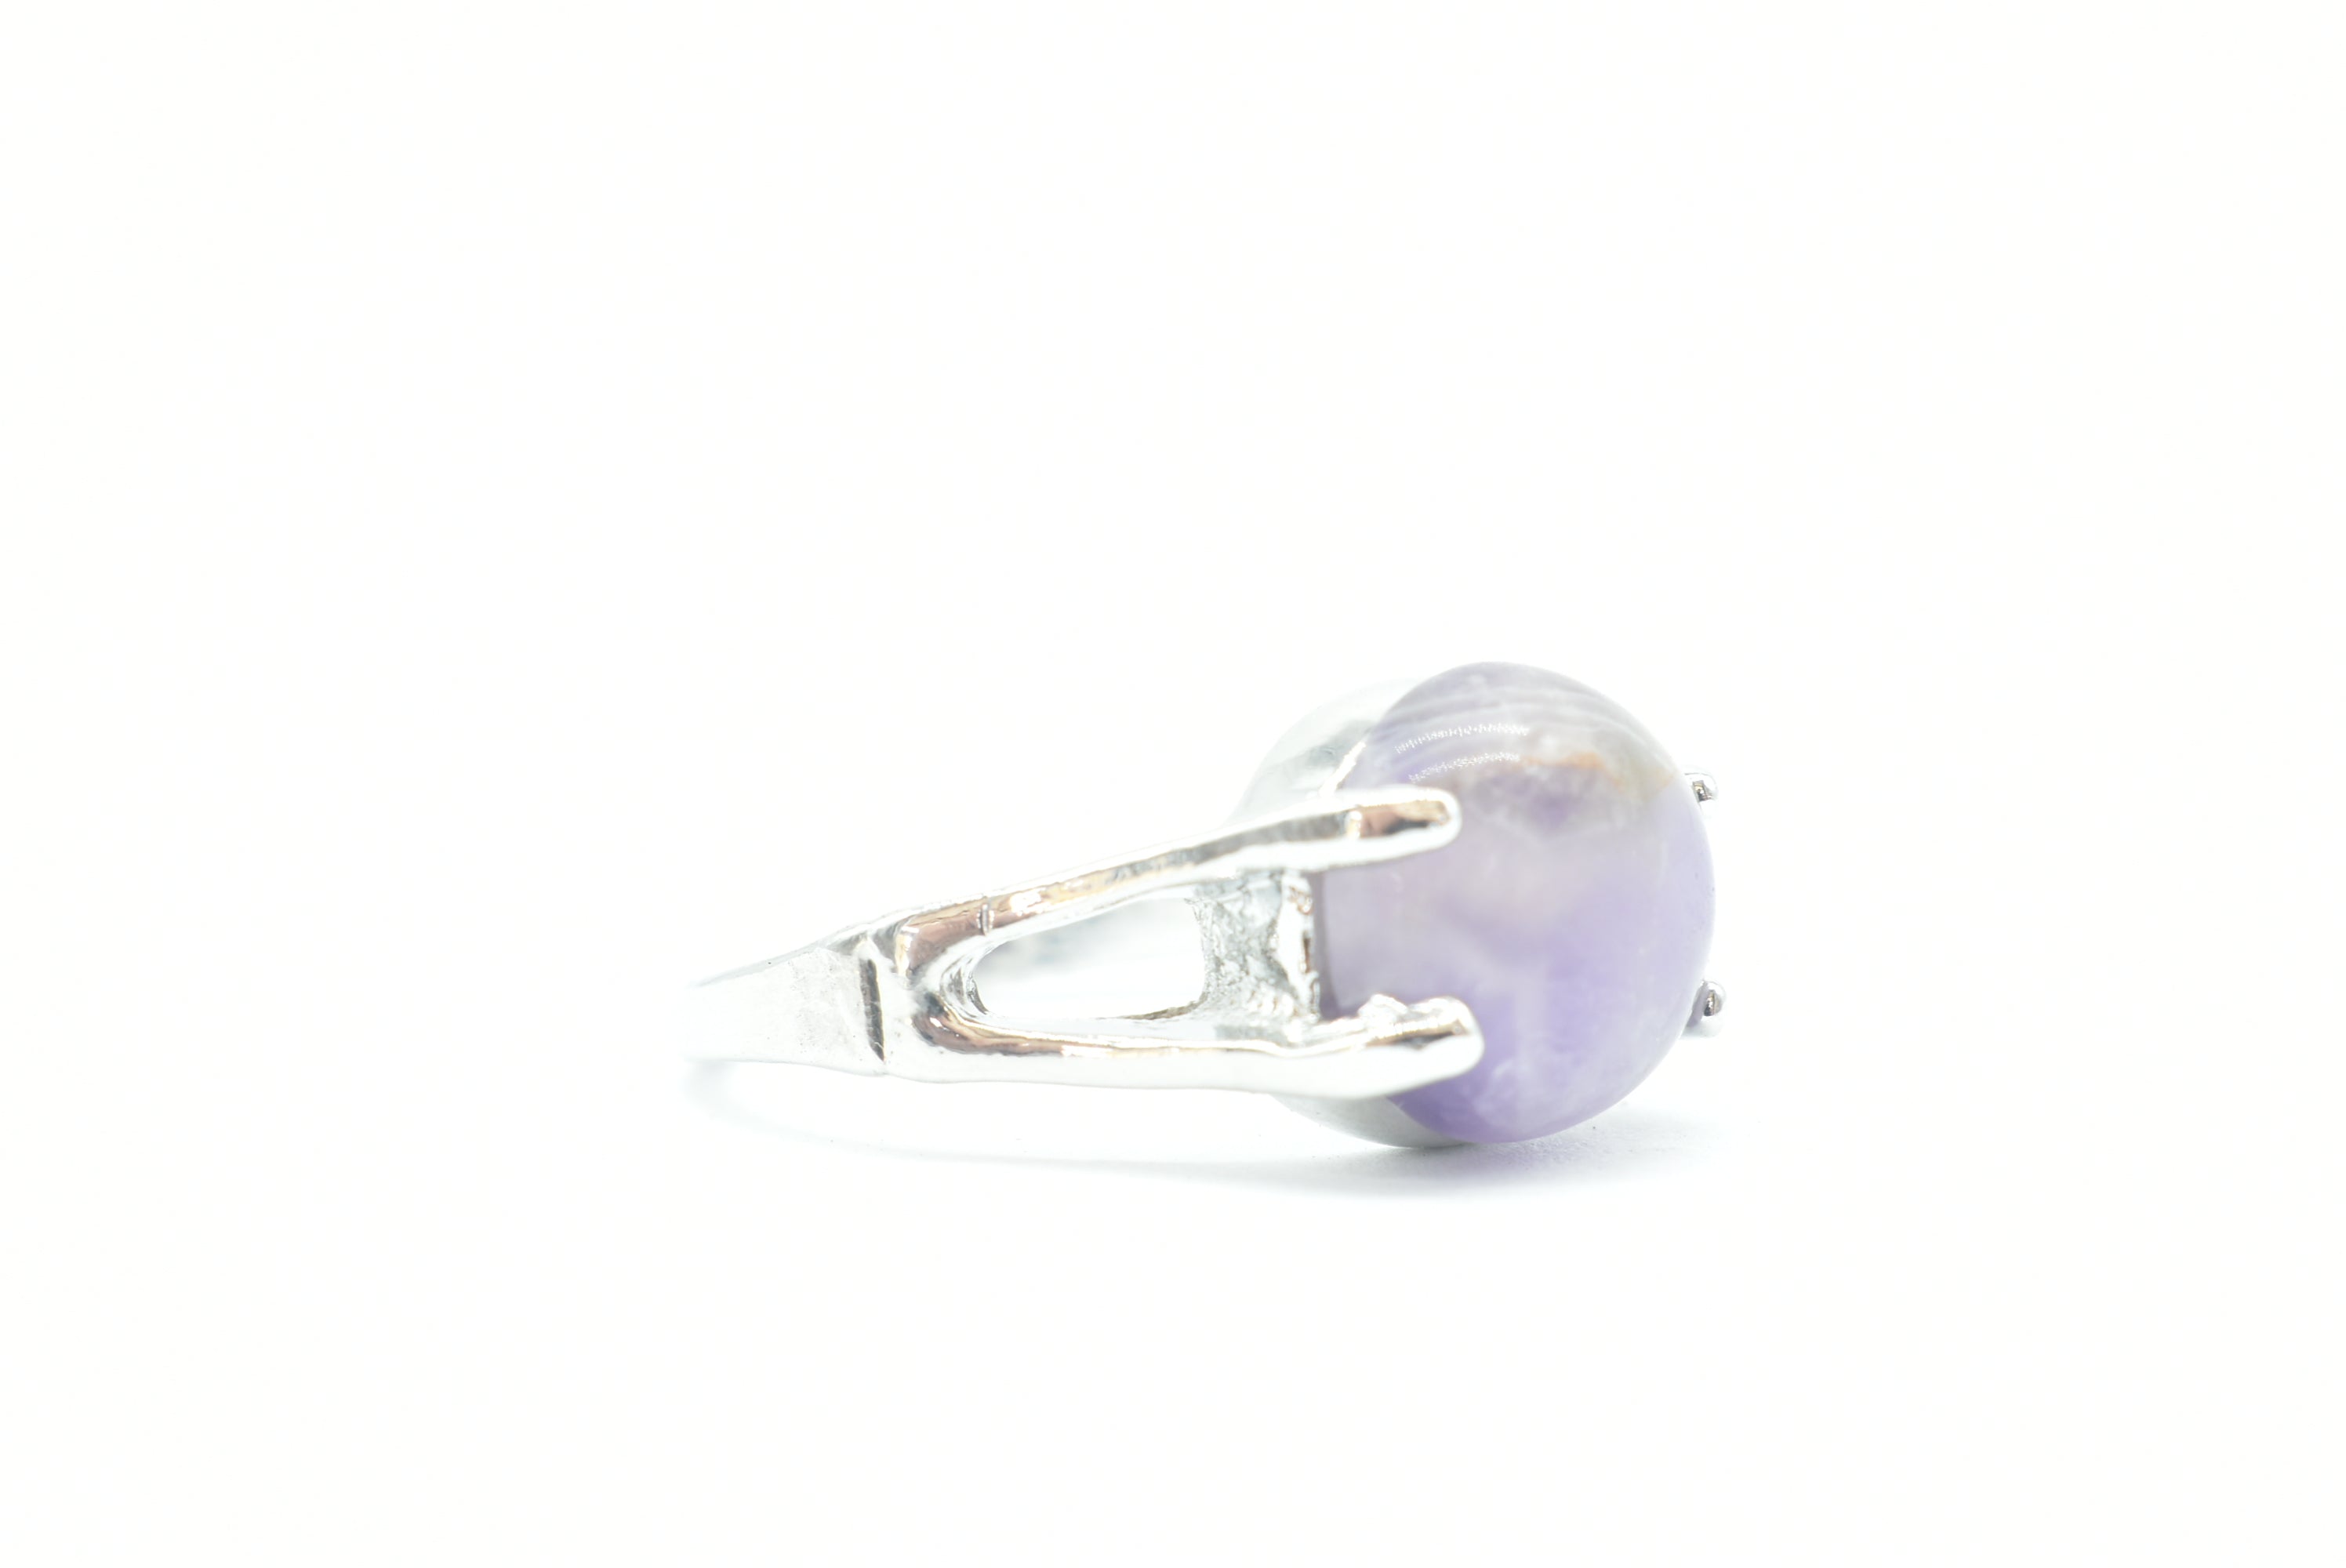 Ring with Amethyst Stone